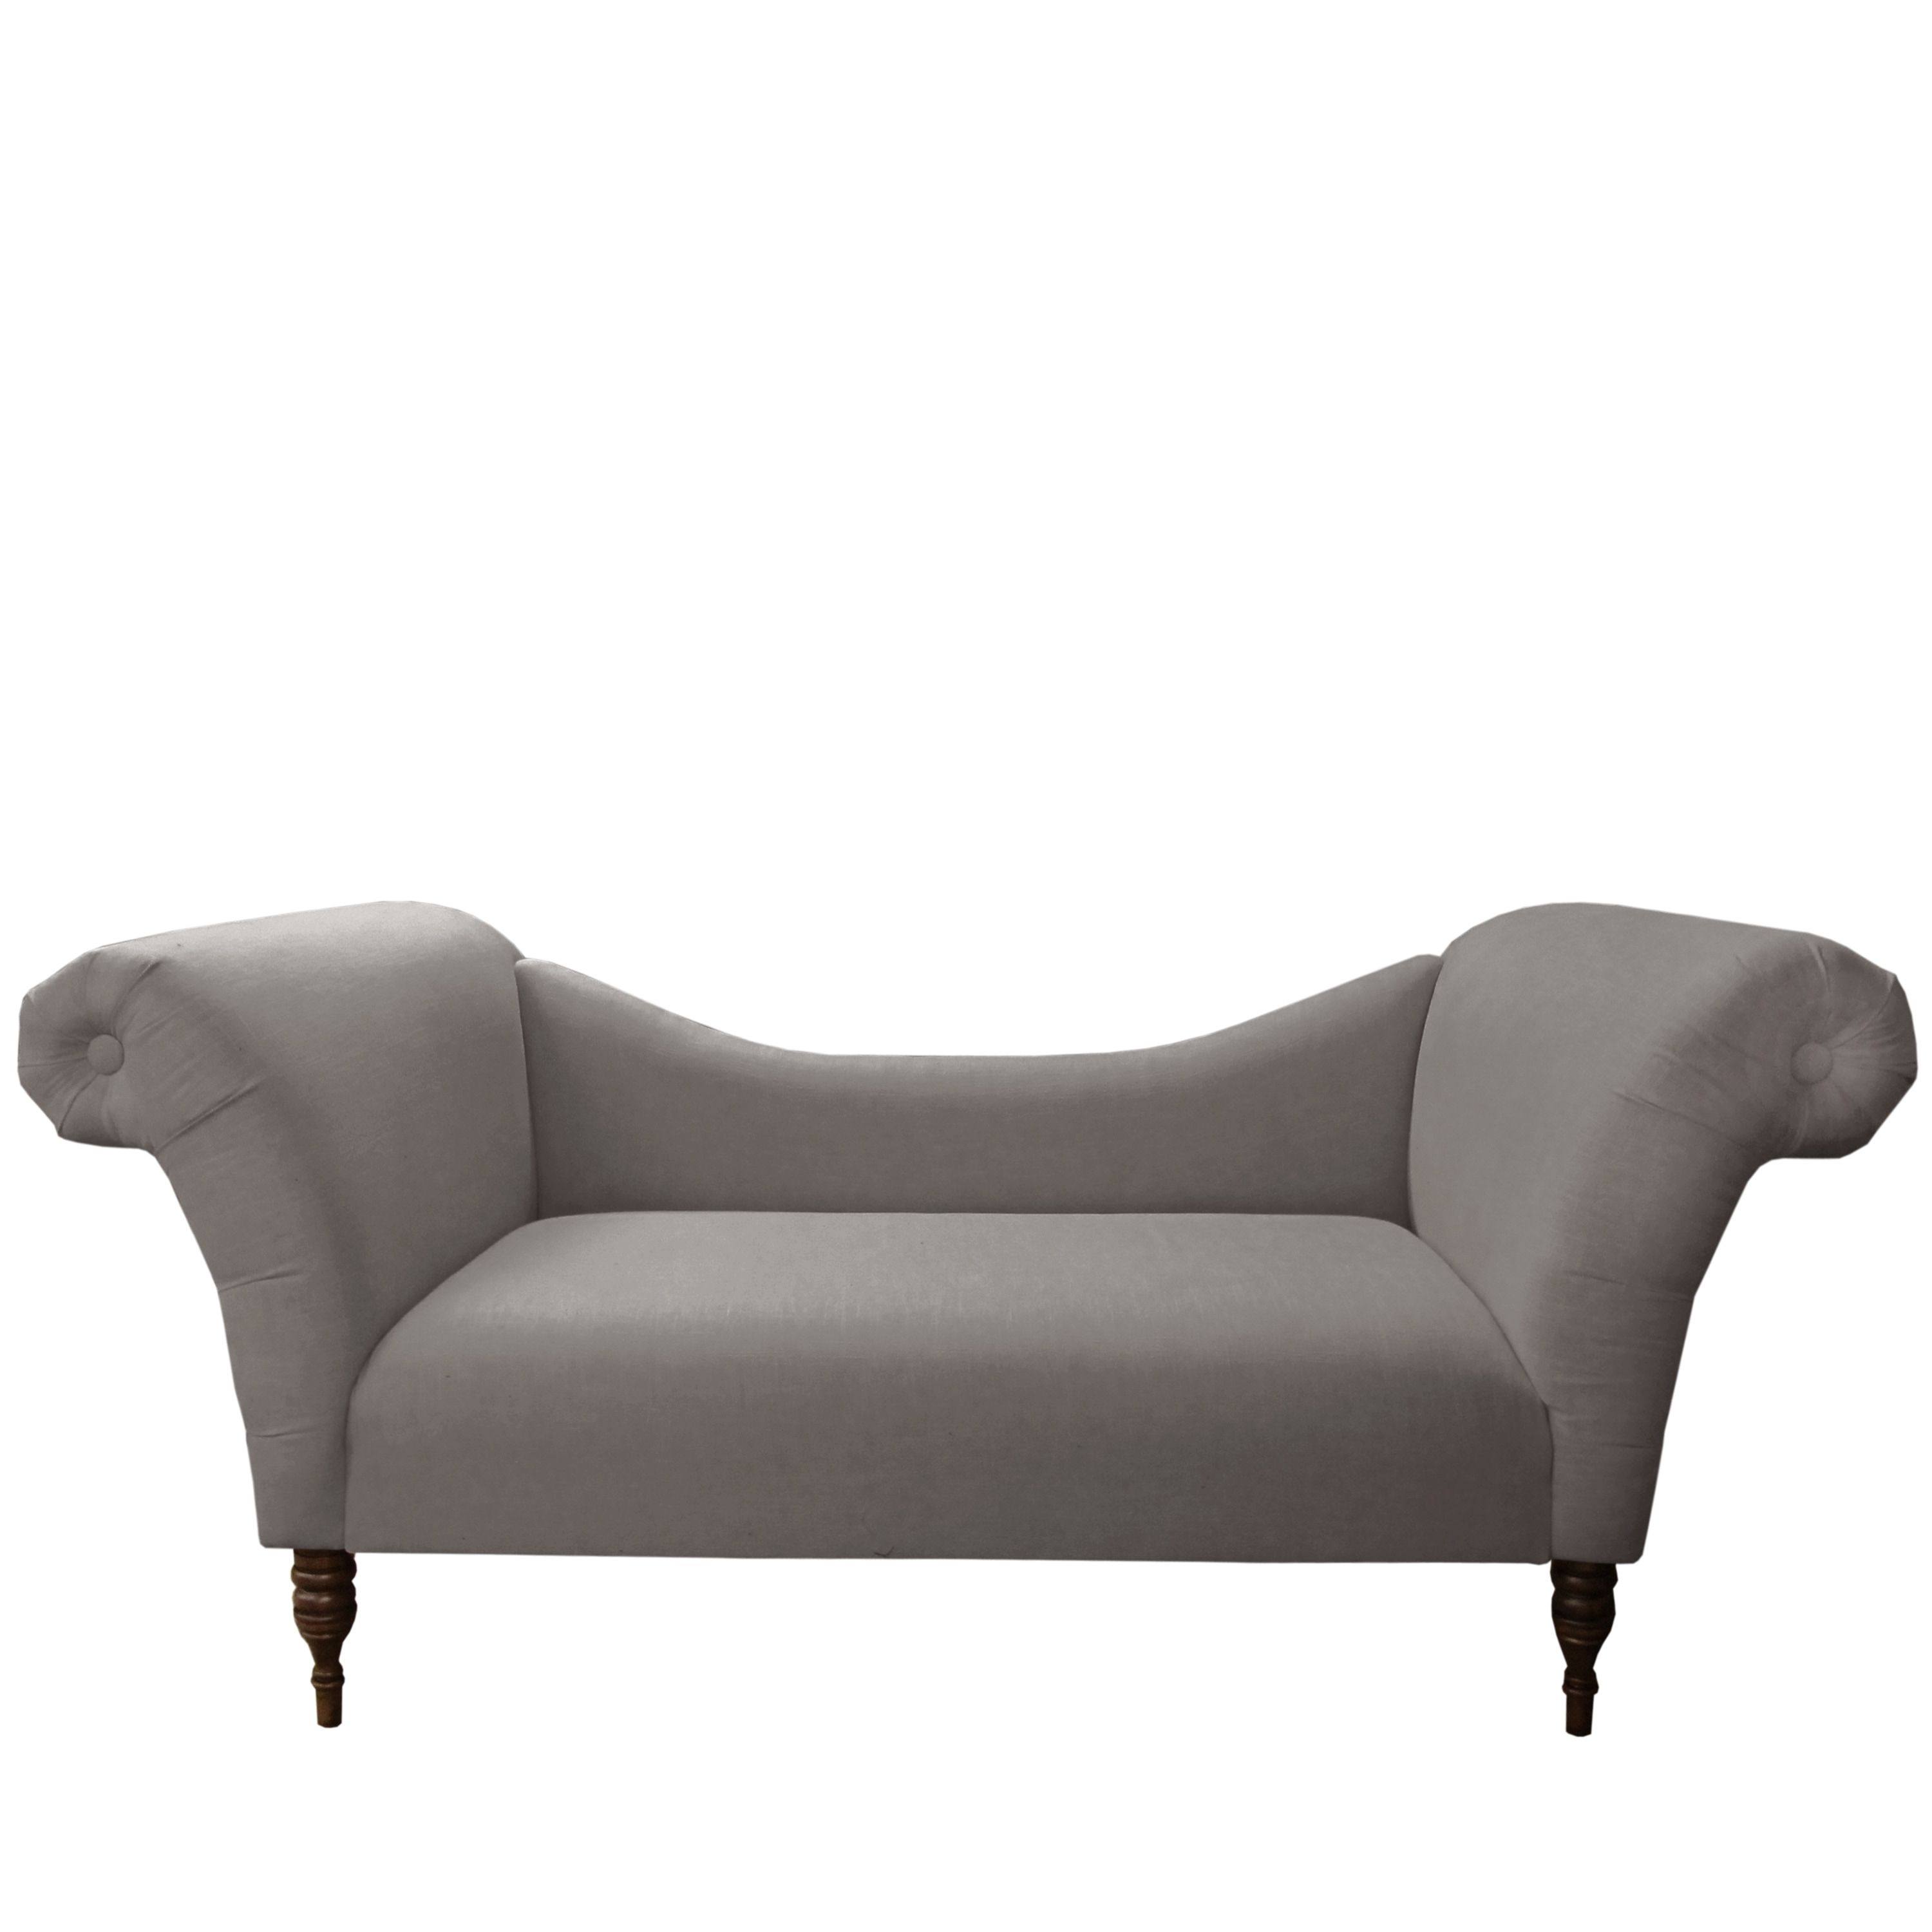 Skyline Furniture Chaise Lounge In Linen Grey – Free Shipping Throughout 2018 Skyline Chaise Lounges (View 11 of 15)